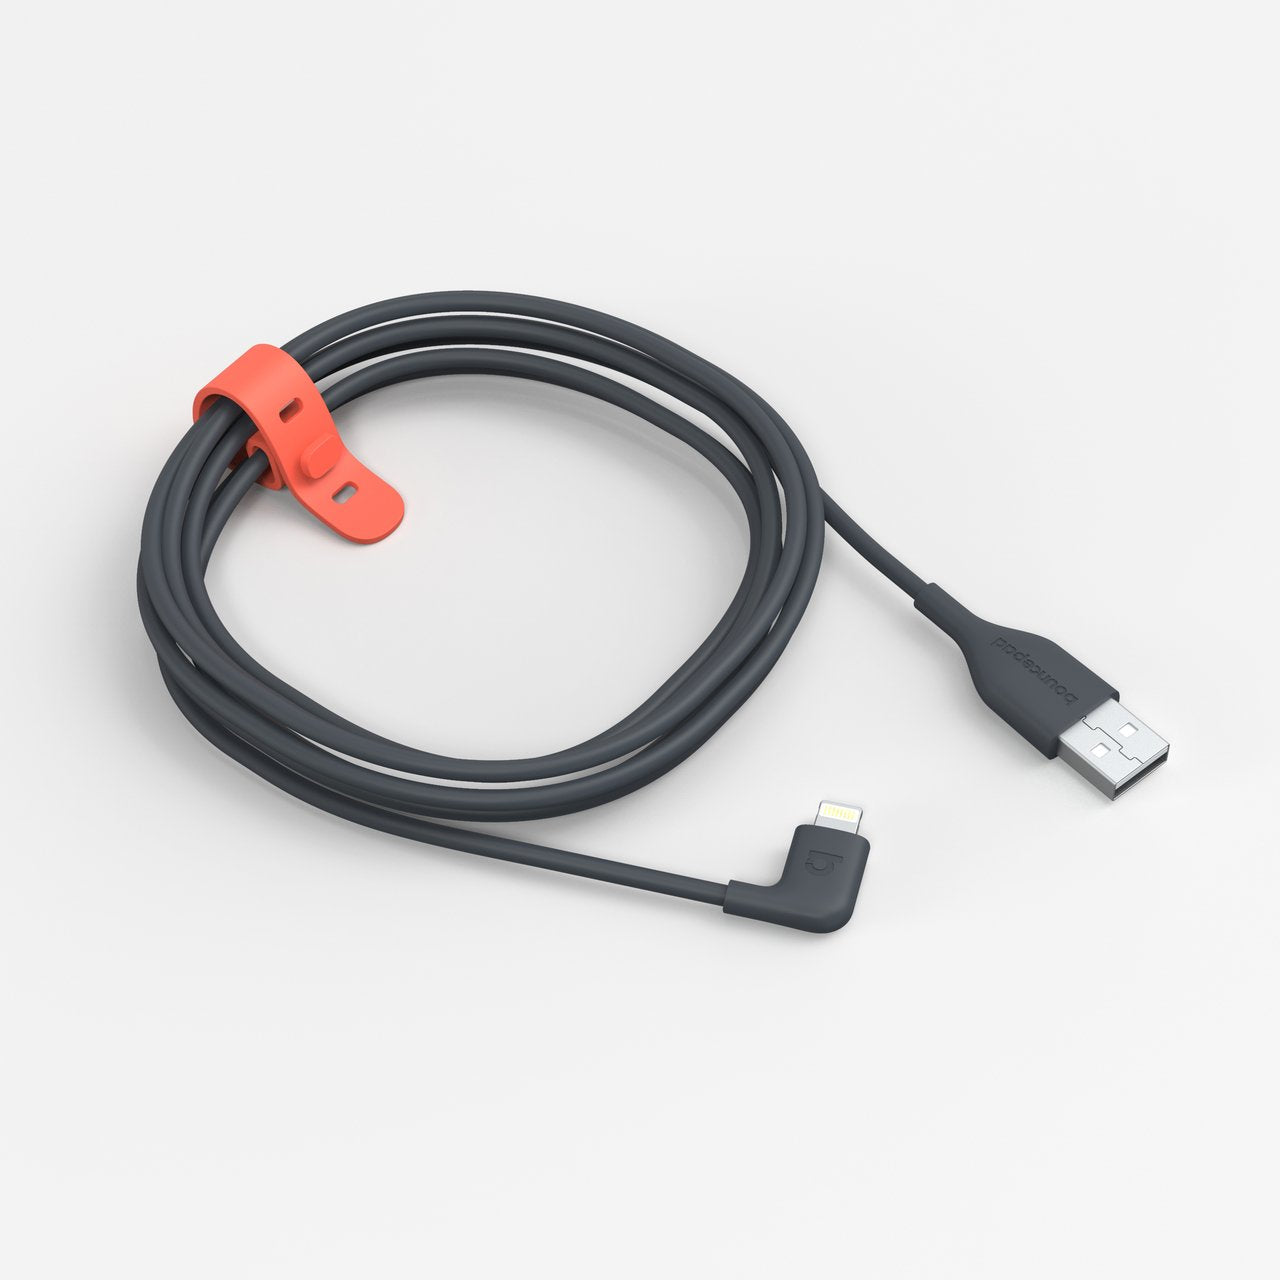 2m Lightning to USB-A Right Angled (MFI Approved) - Black